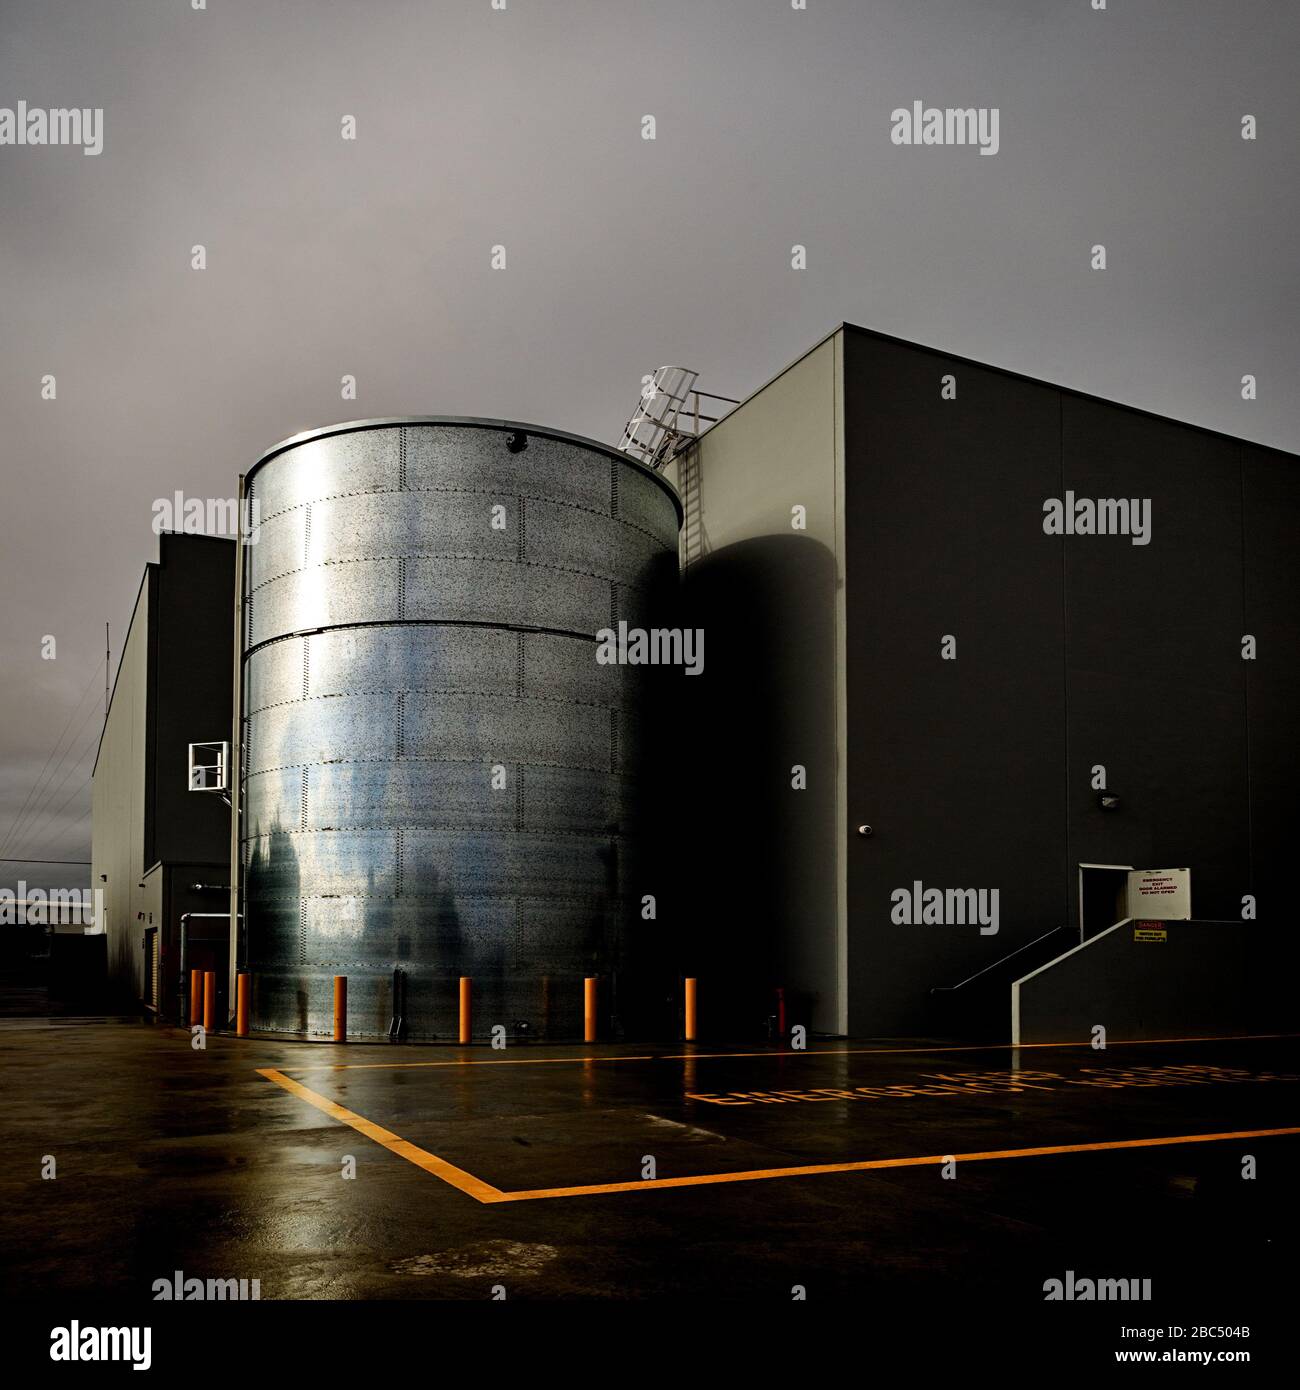 Steel water tank in industrial setting on a rainy day Stock Photo